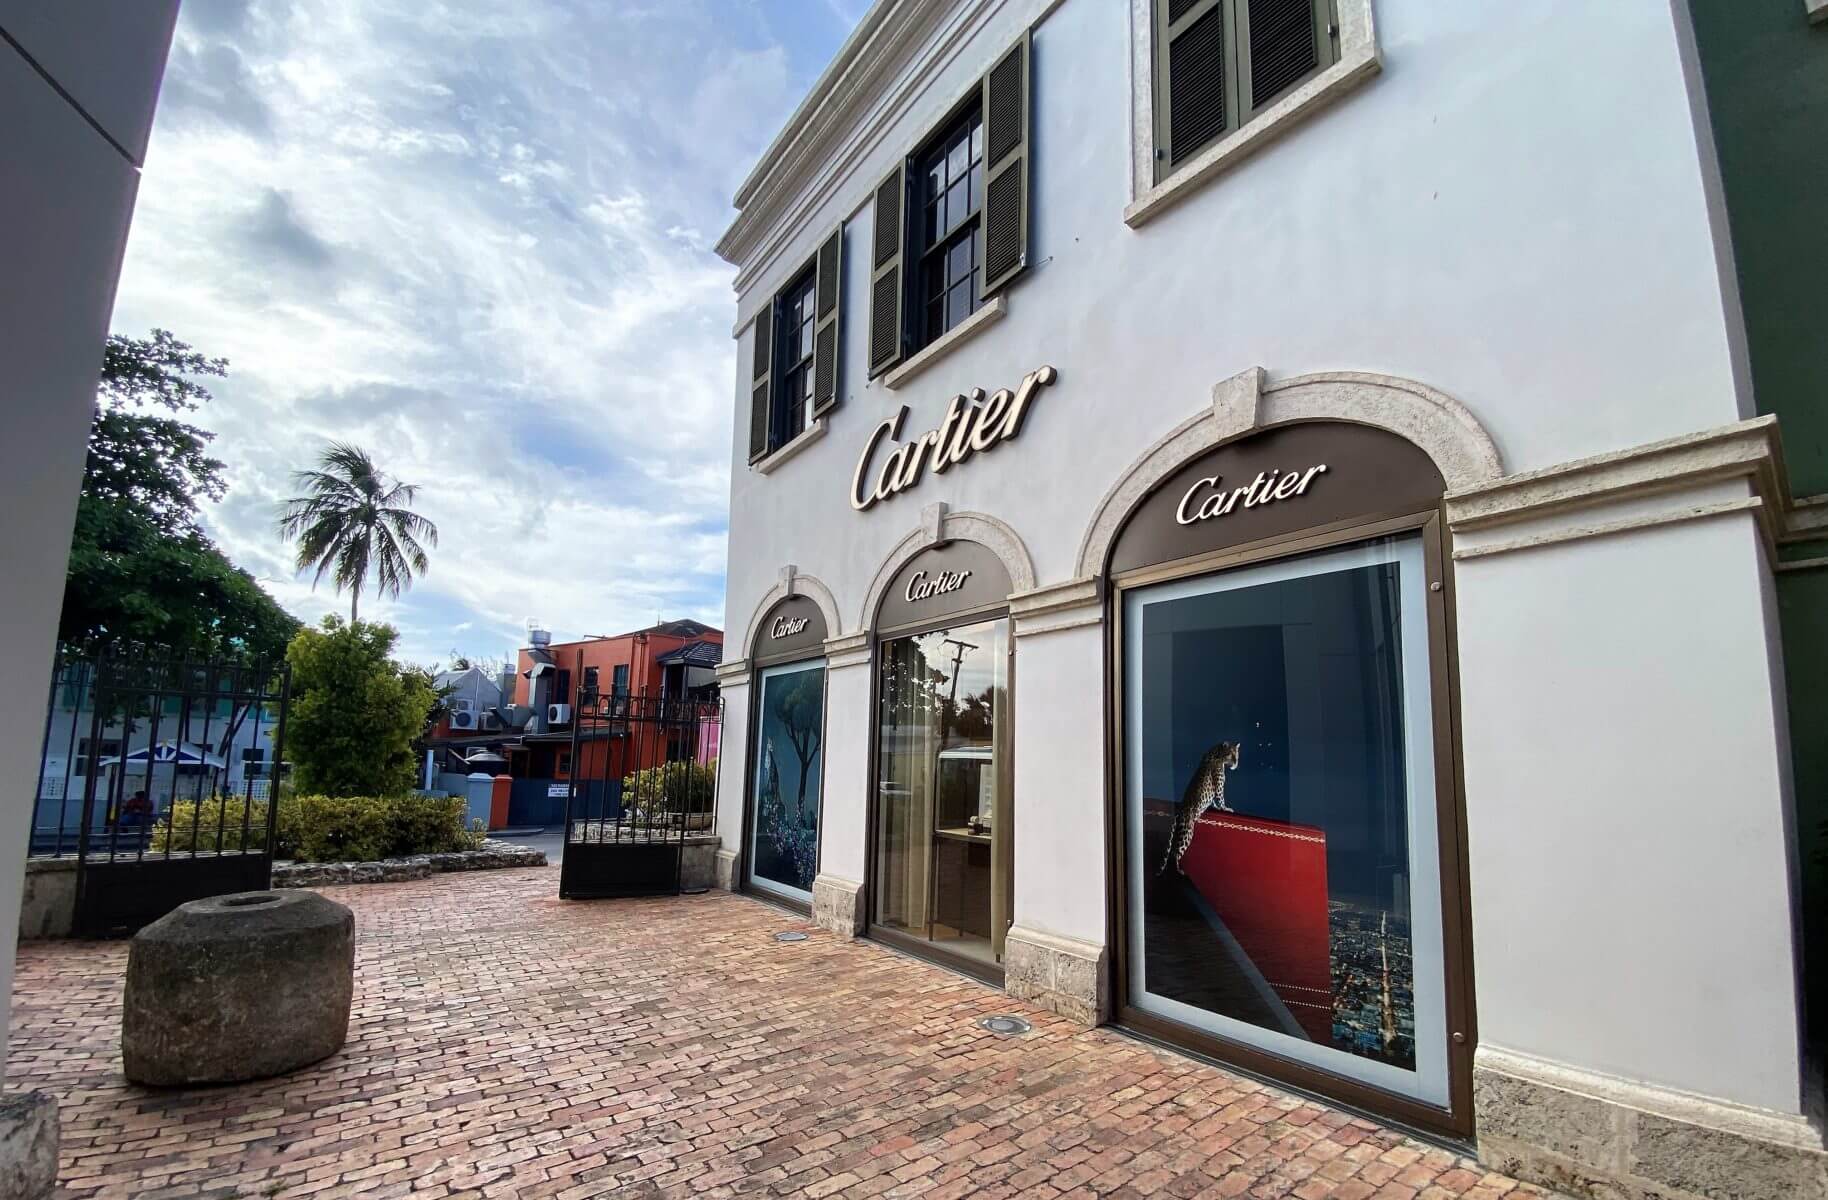 LUXURIA LIFESTYLE WELCOMES LIMEGROVE LIFESTYLE CENTRE AS A NEW PLATINUM PARTNER – SHOP AND DINE IN STYLE IN BARBADOS